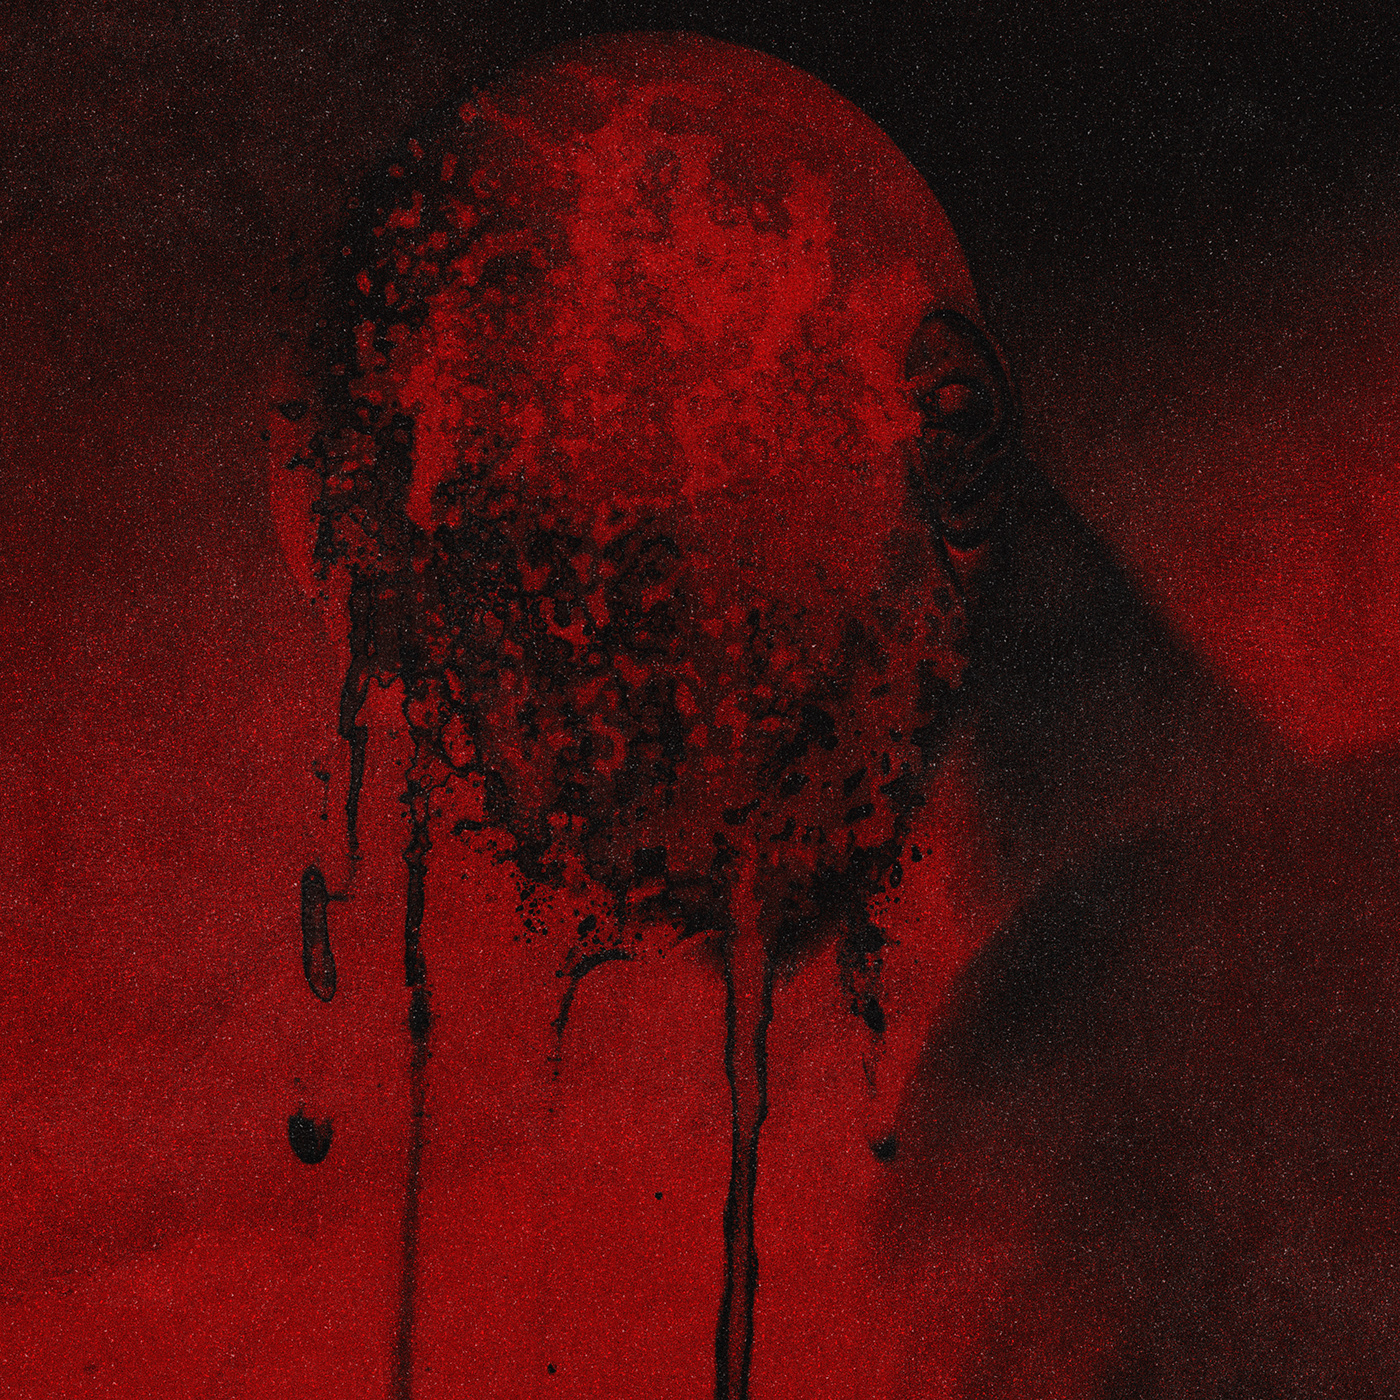 A faceless figure with a melted face, against a red background, the image is gritty and textured.